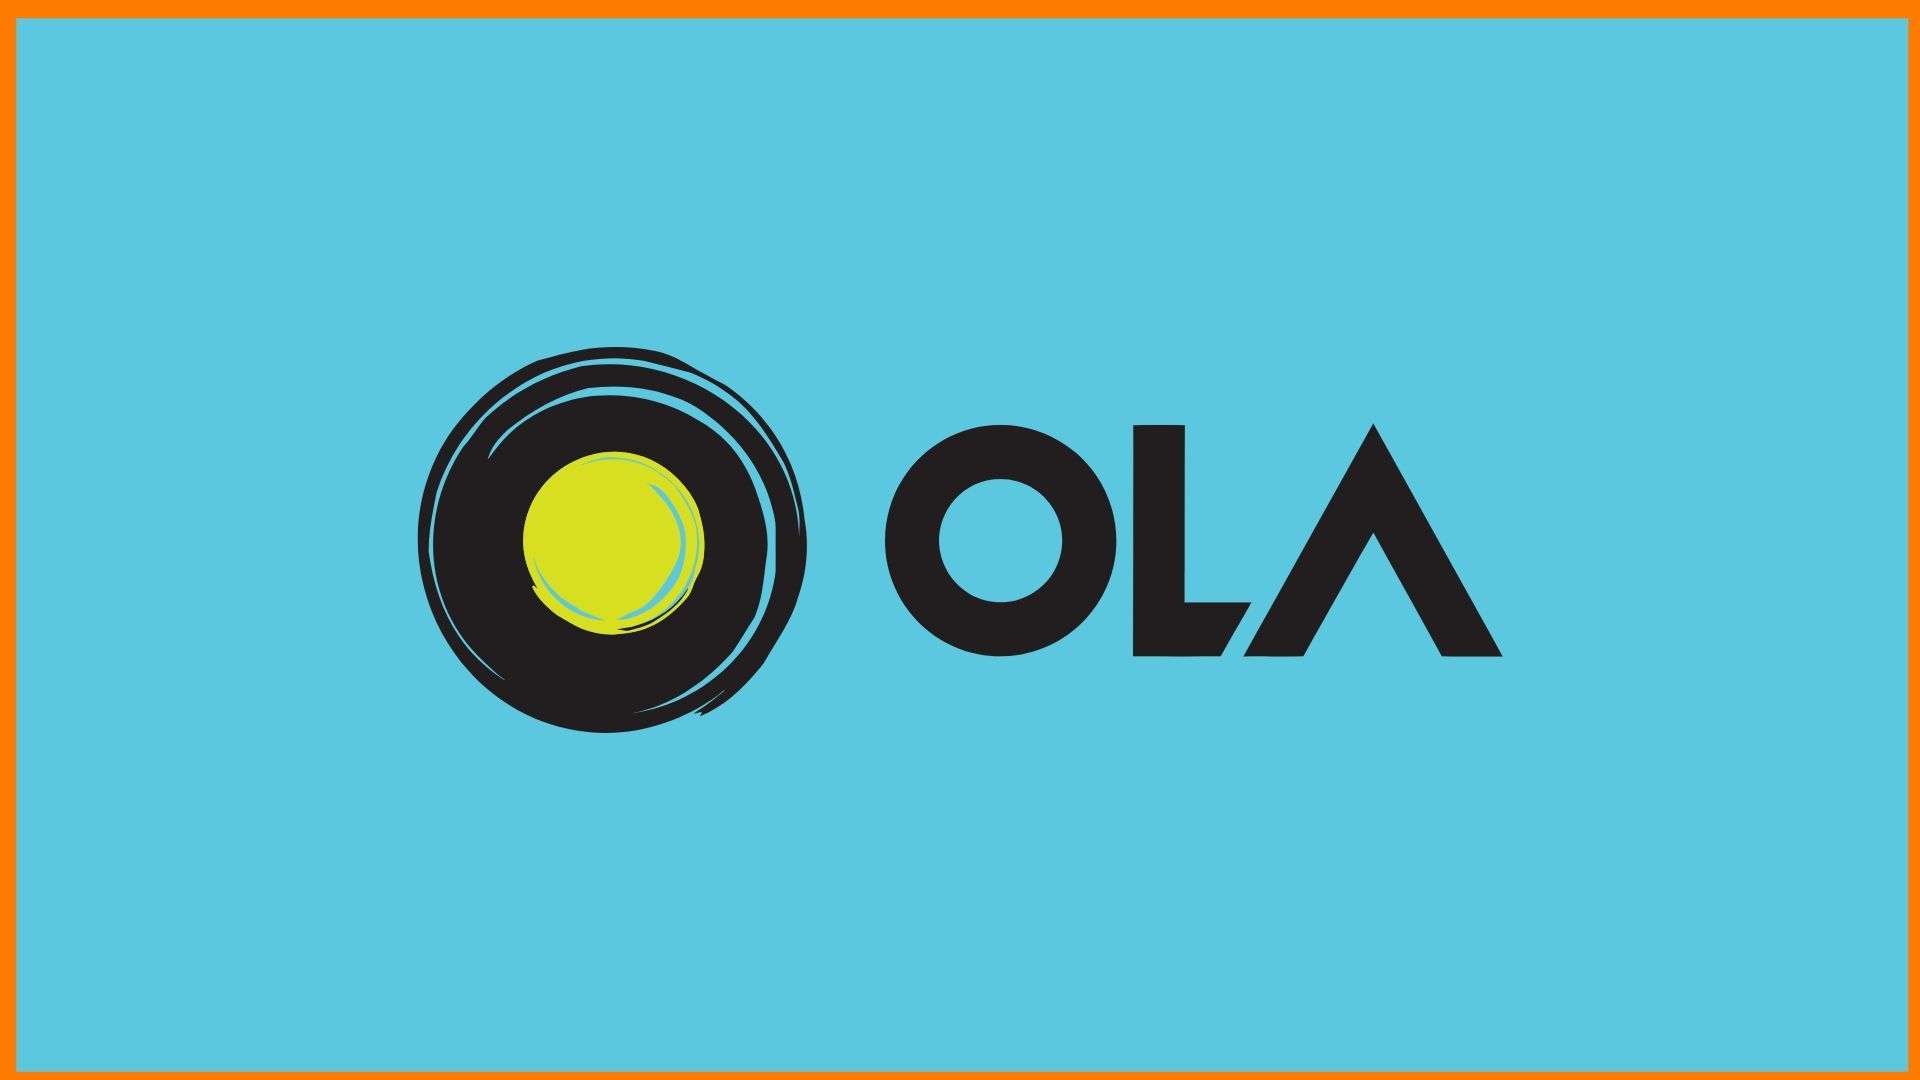 OLA - Competing World's Most Valued Startup from India